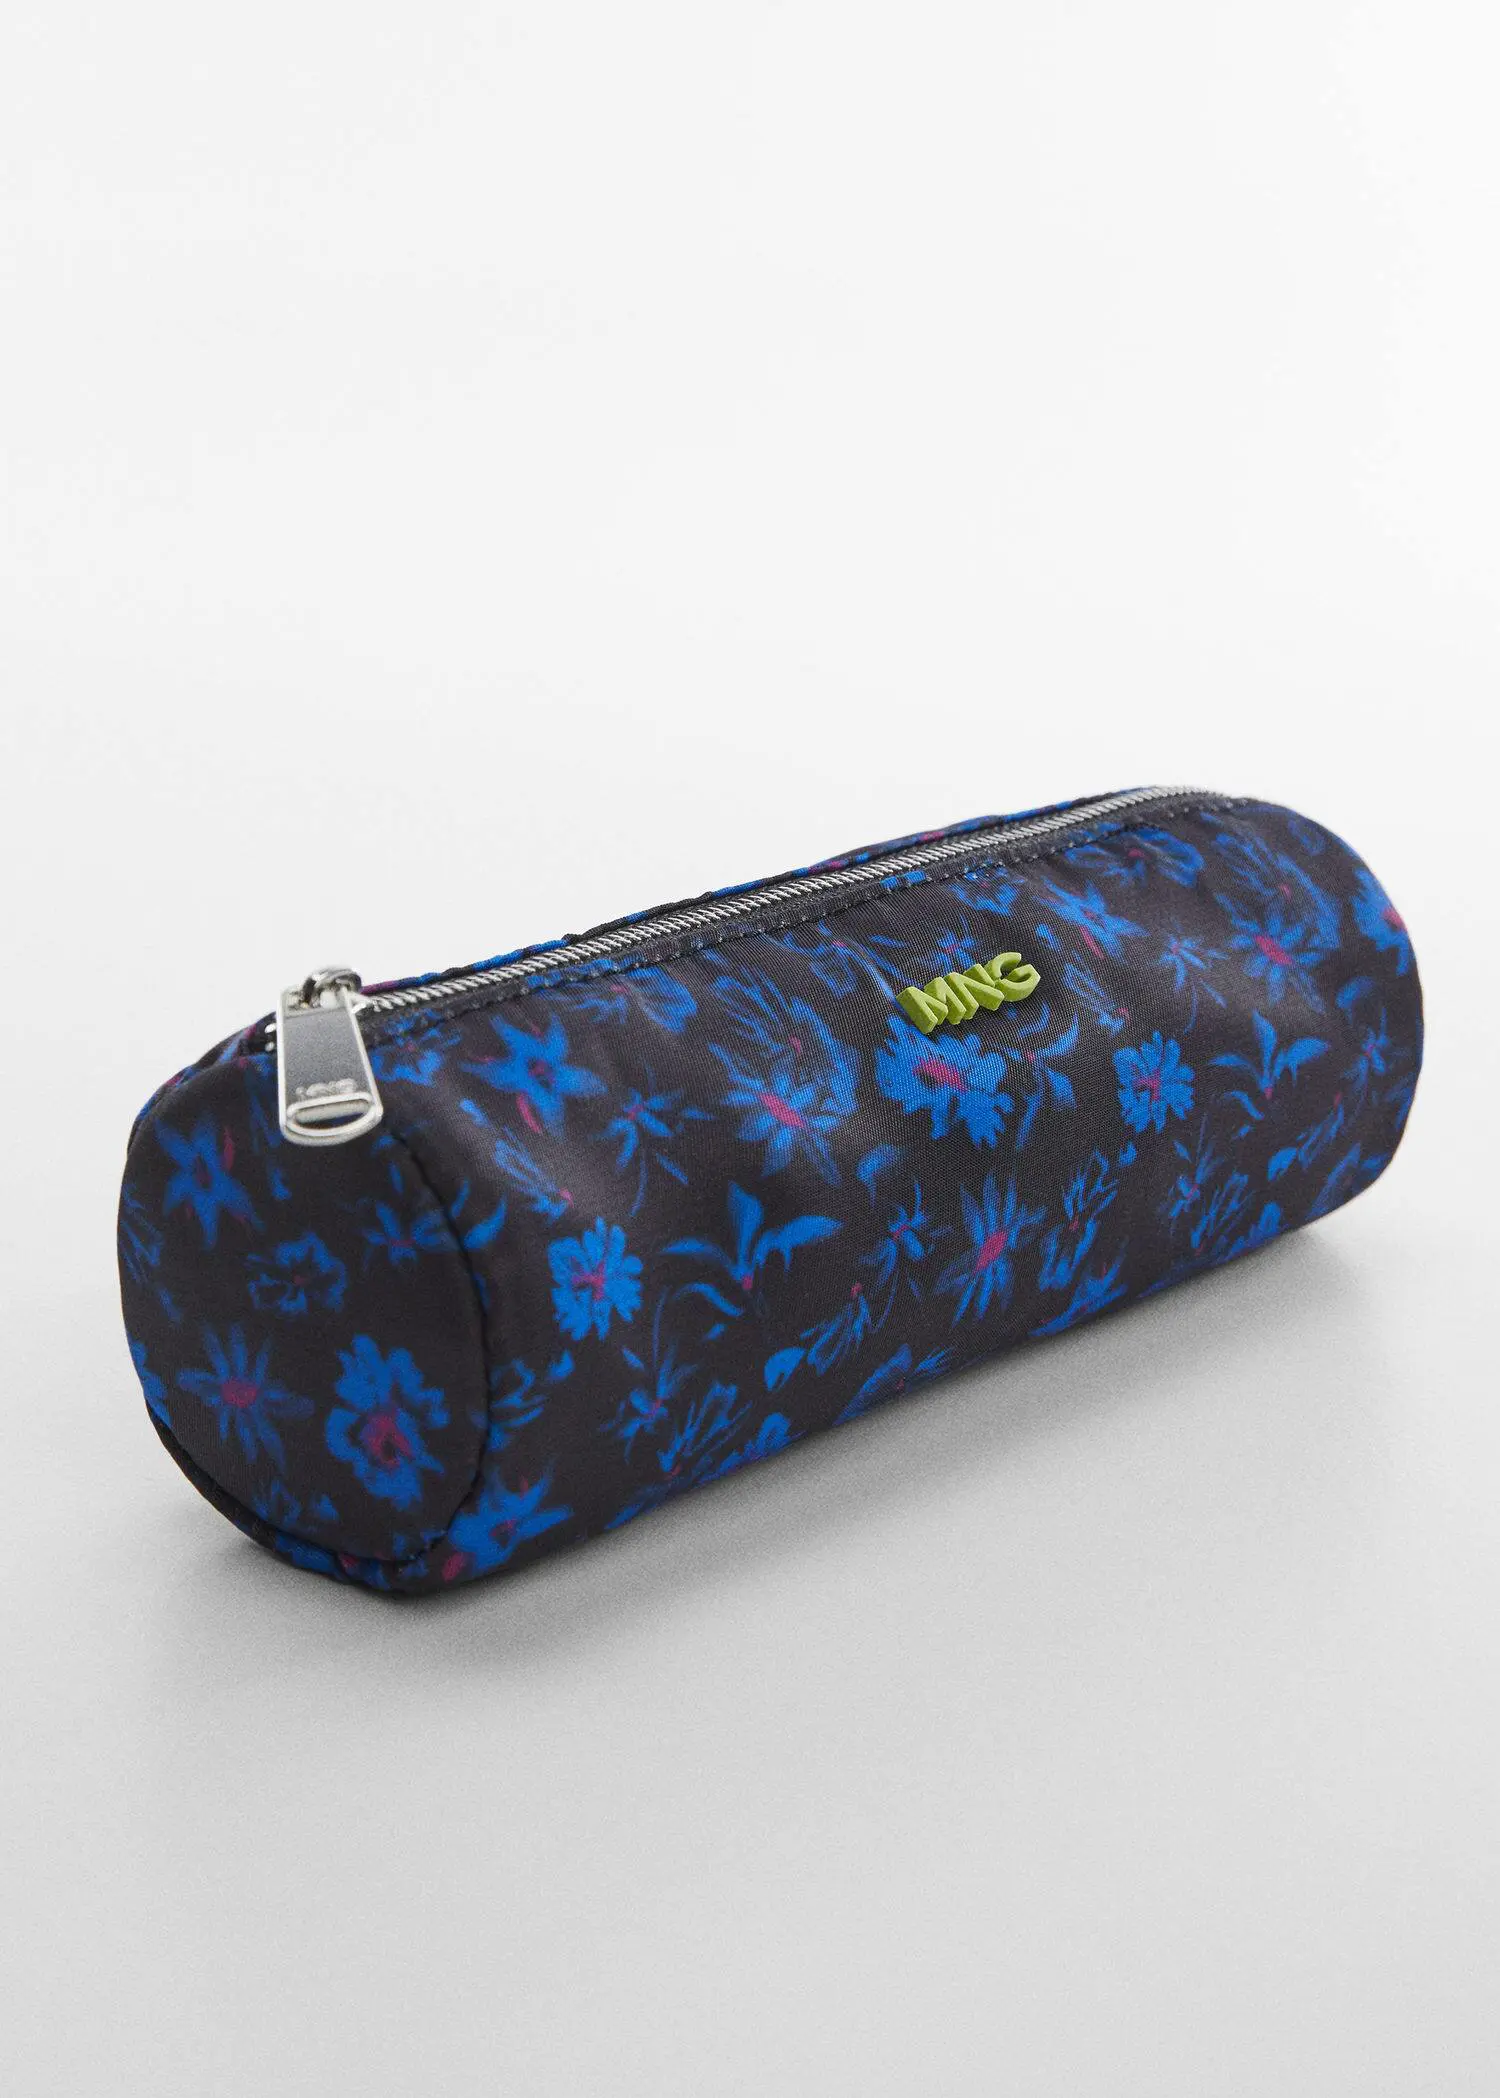 Mango Logo zipped pencil case. a pencil case with blue flowers on it. 